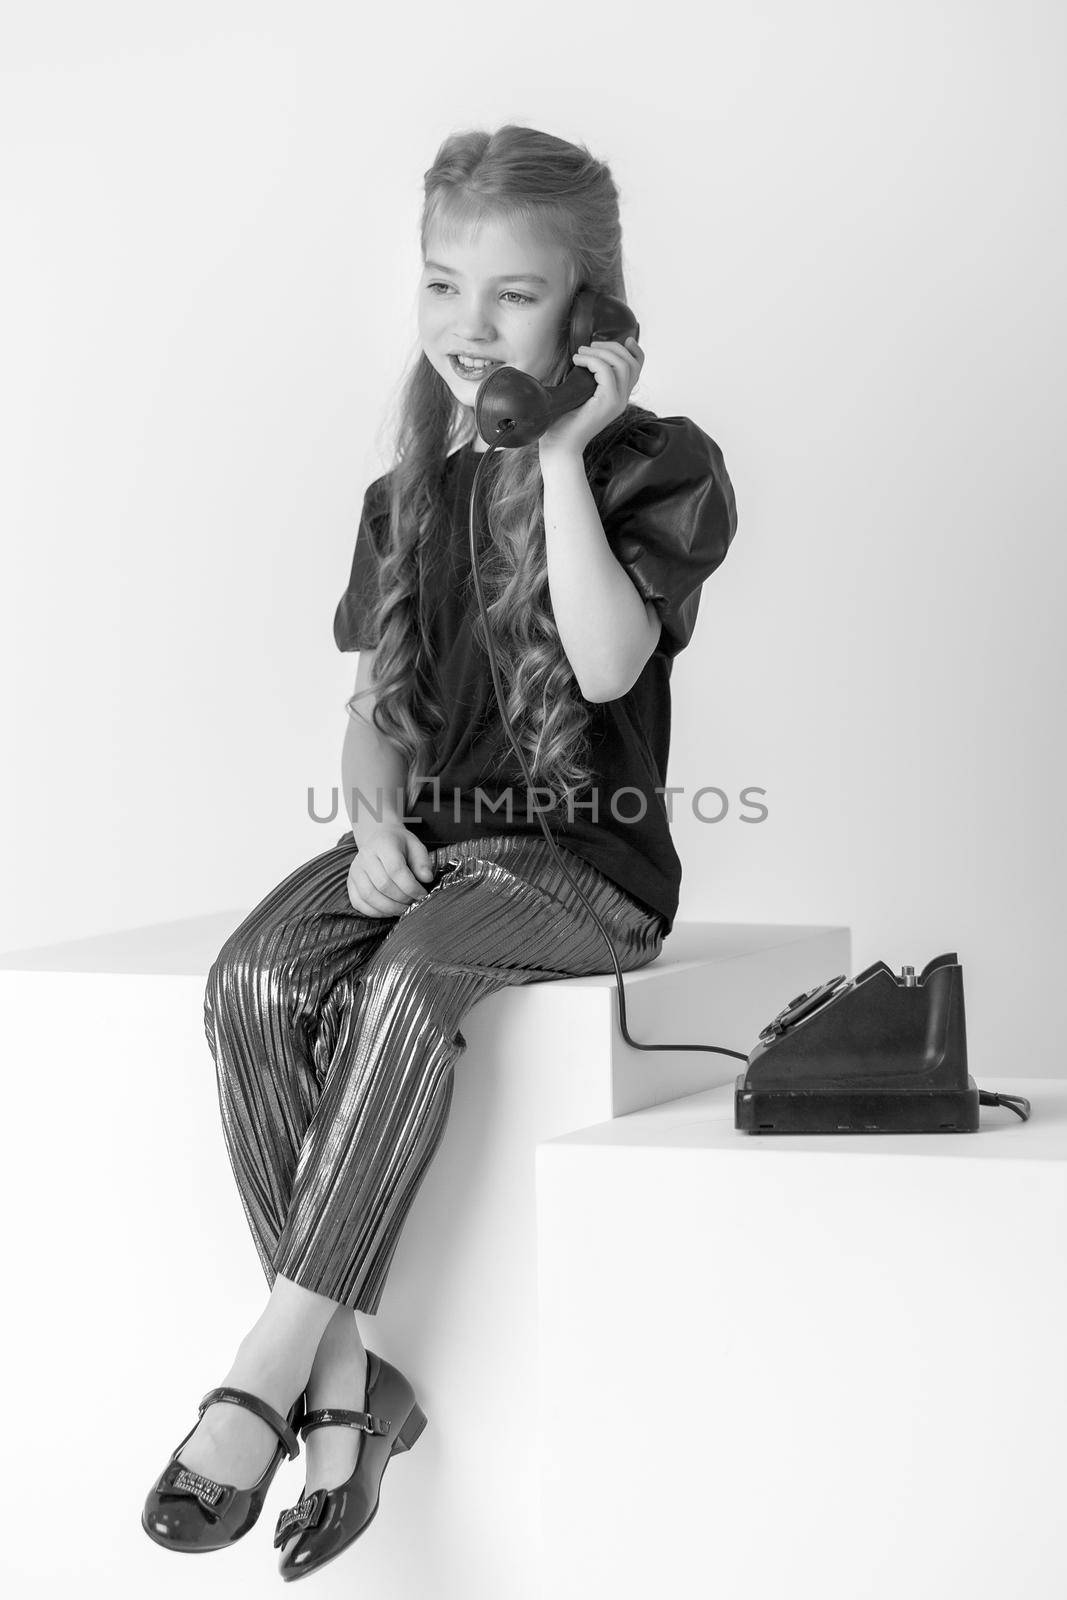 A little girl is ringing on the old phone. by kolesnikov_studio